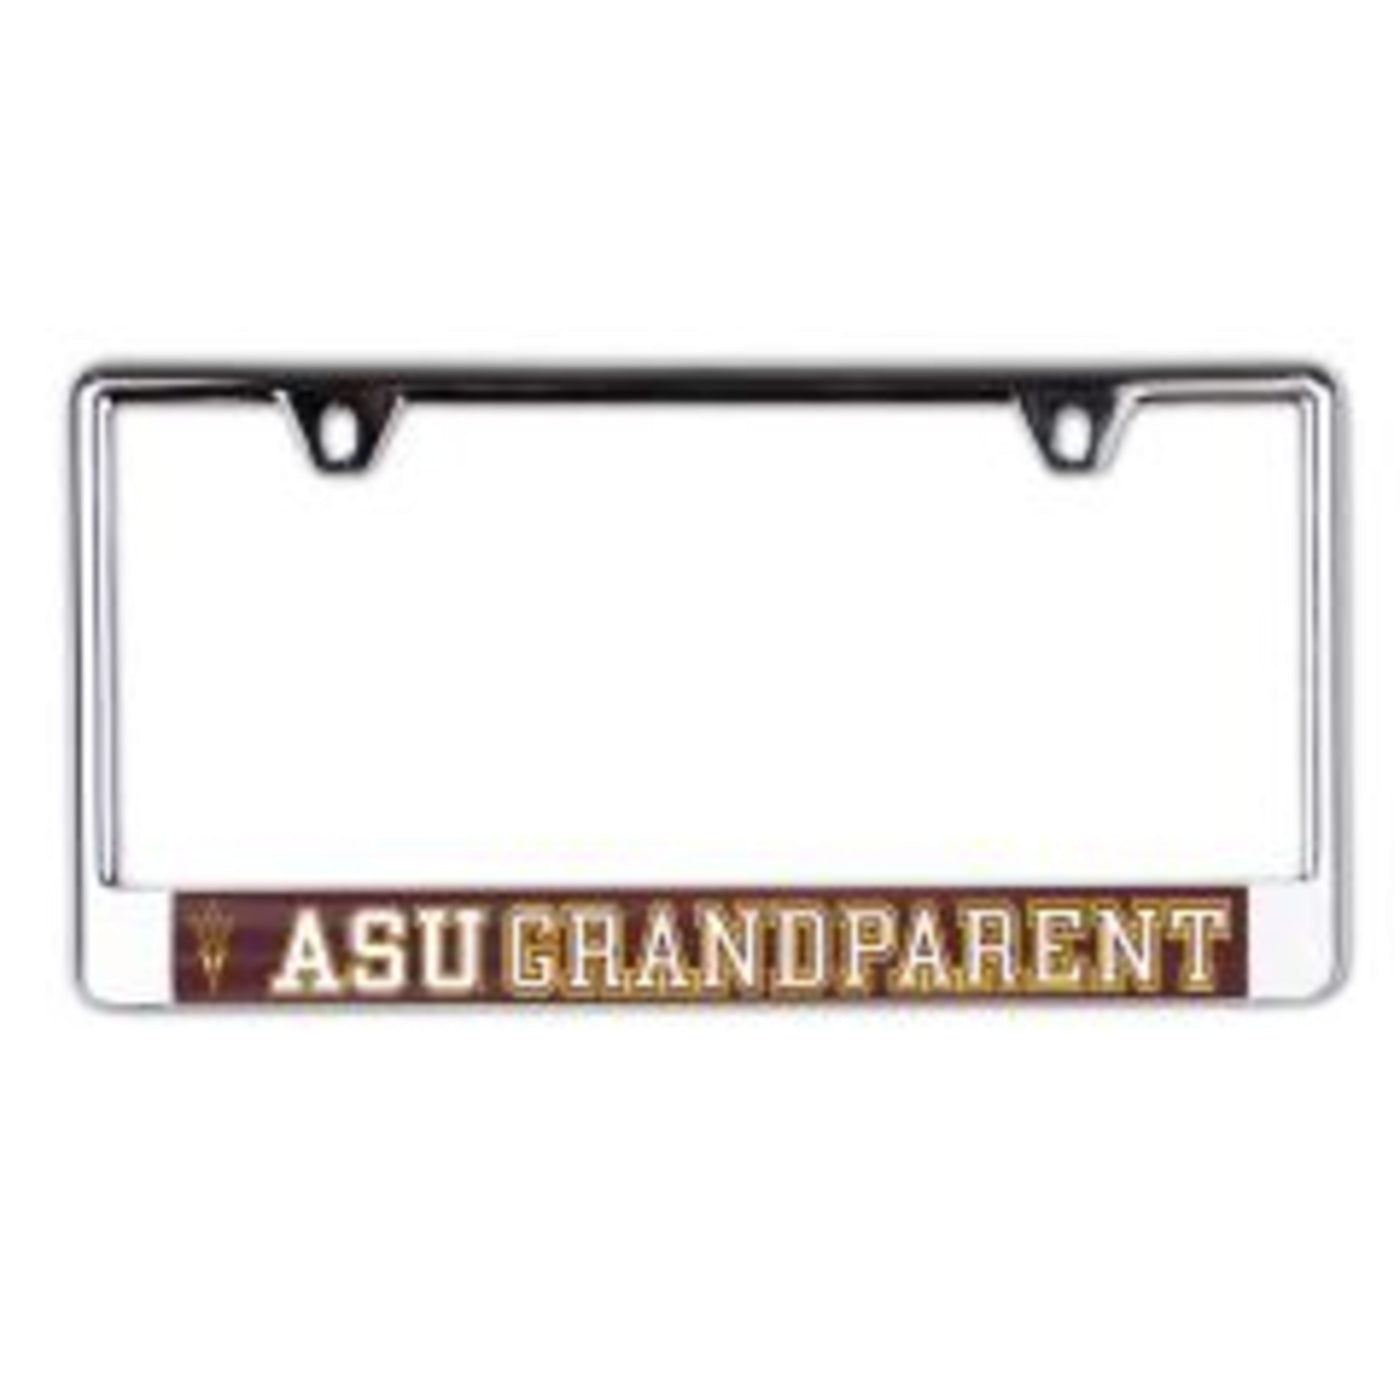 ASU silver license plate frame with maroon bar on bottom. On top of maroon section is a gold outline of a pitchfork and the text 